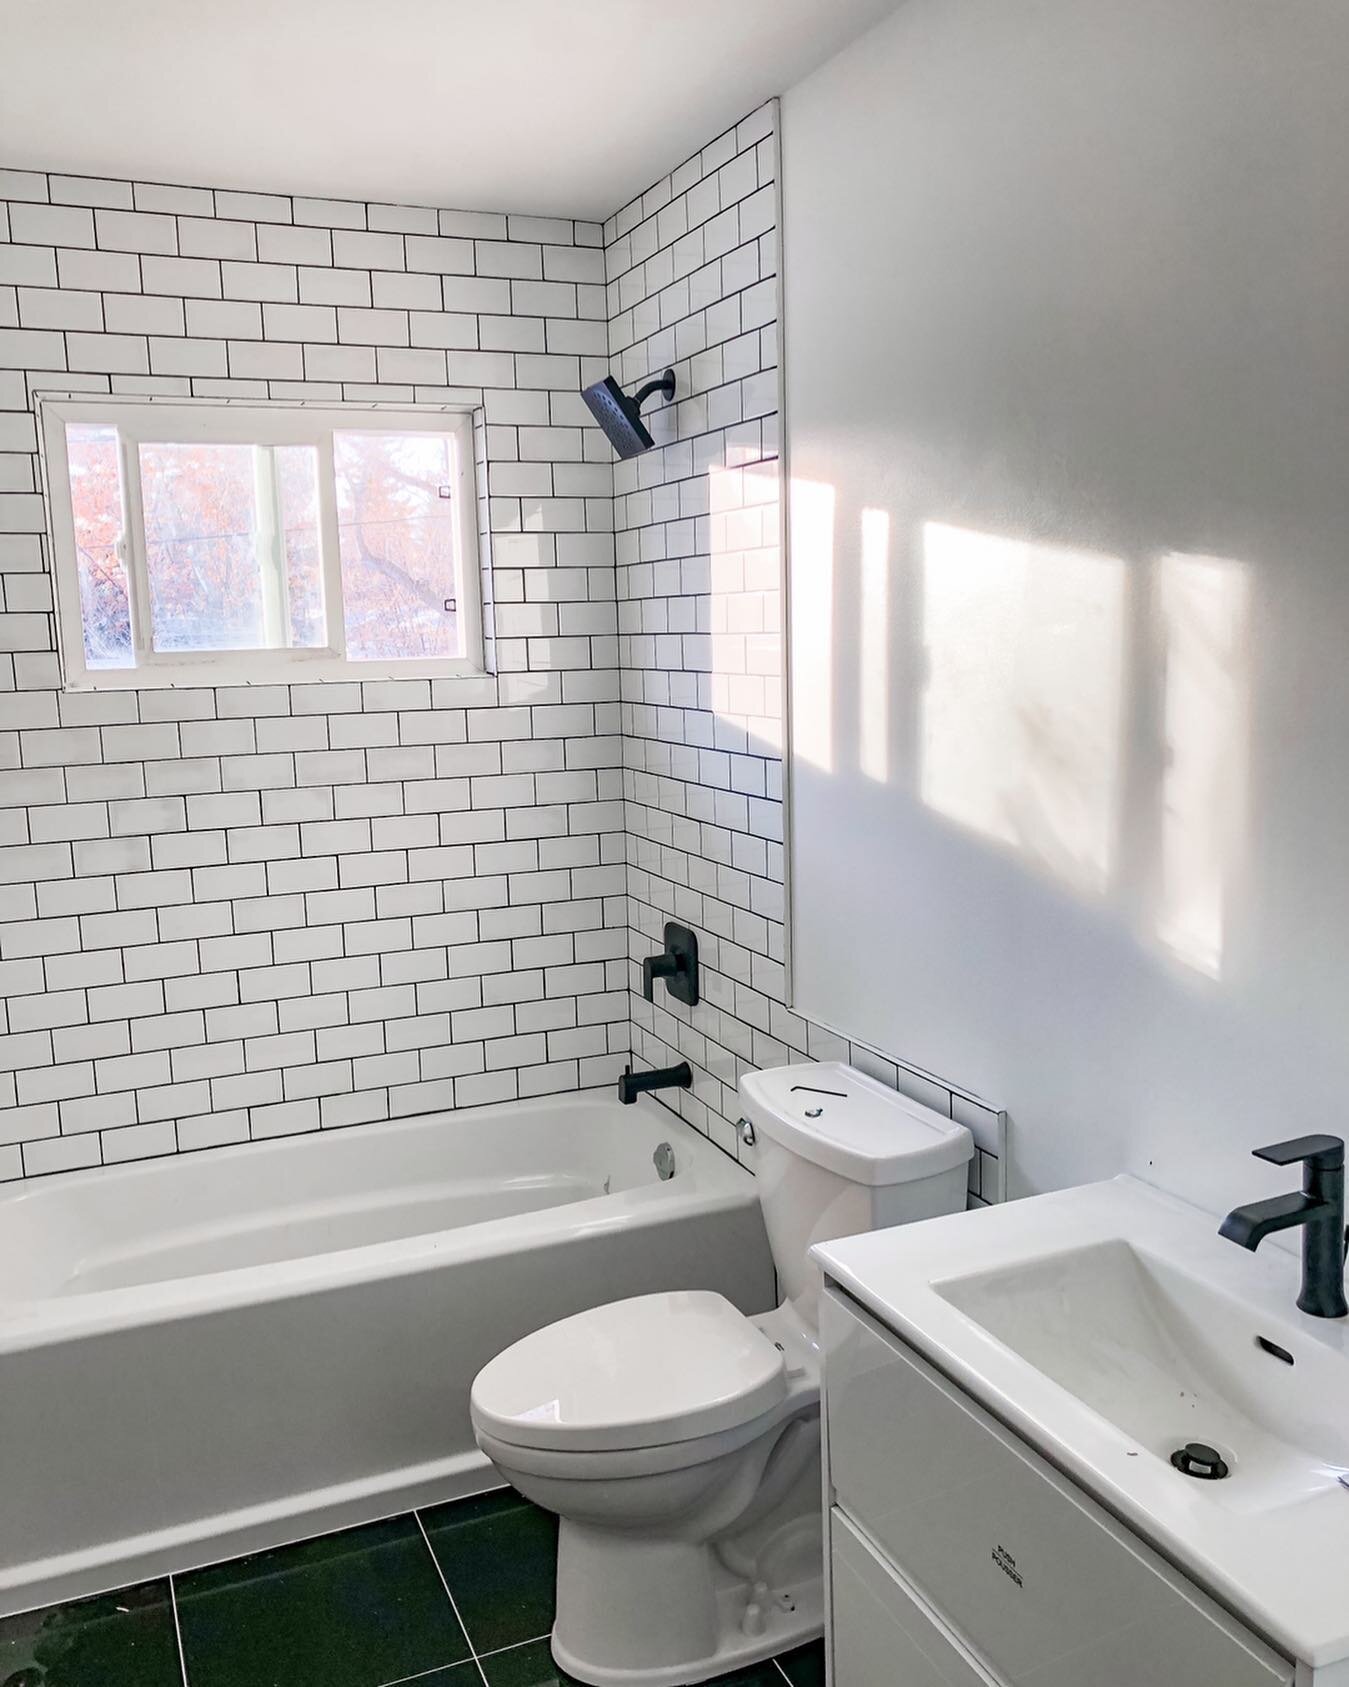 A bathroom deserves as much attention to detail as any other living space in your home&mdash;this is often the first room you spend time in every morning, and a beautifully designed space can help jumpstart your day and make your daily routine a litt